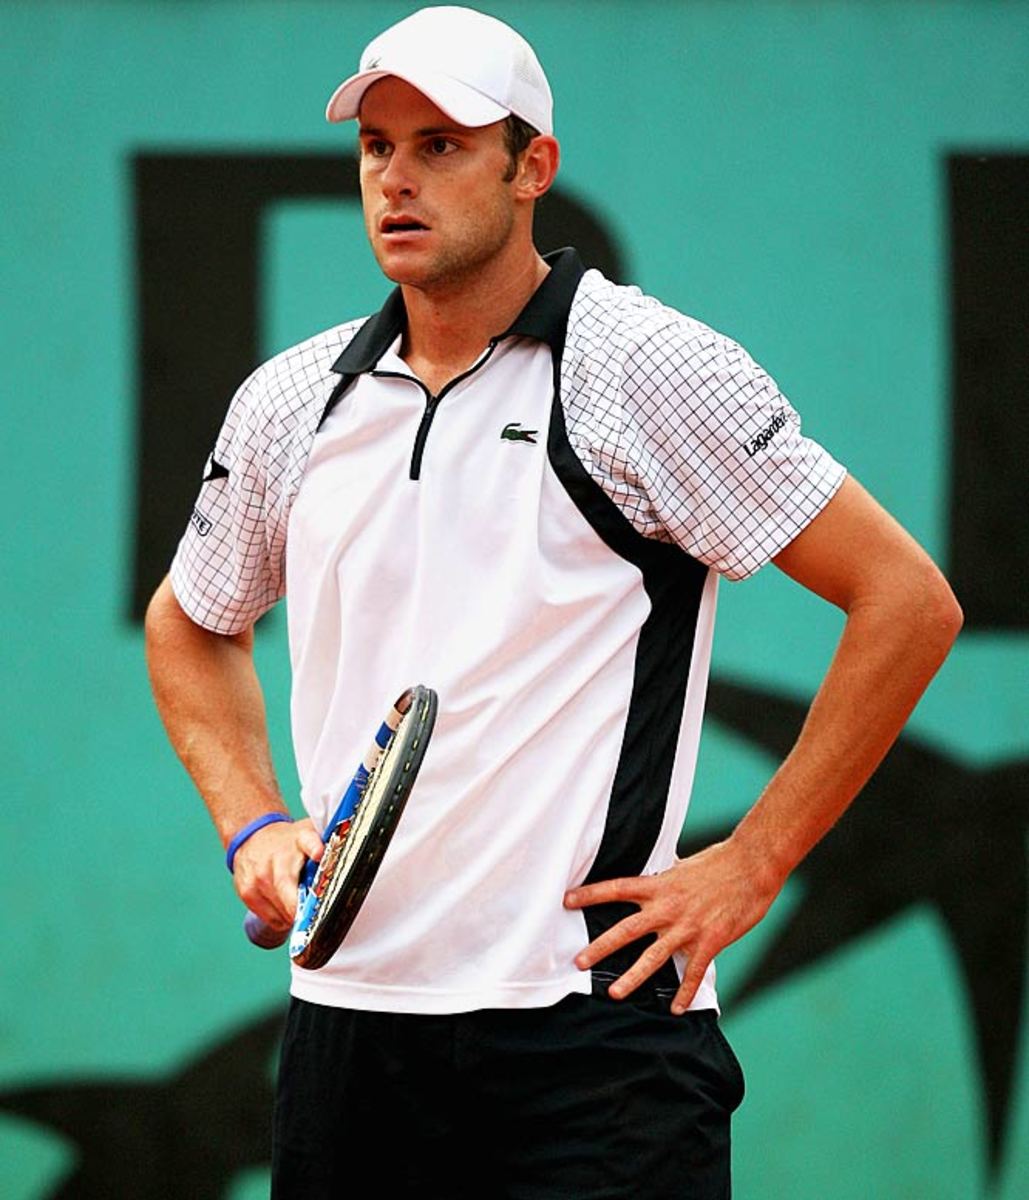 Andy roddick naked dick-pics and galleries